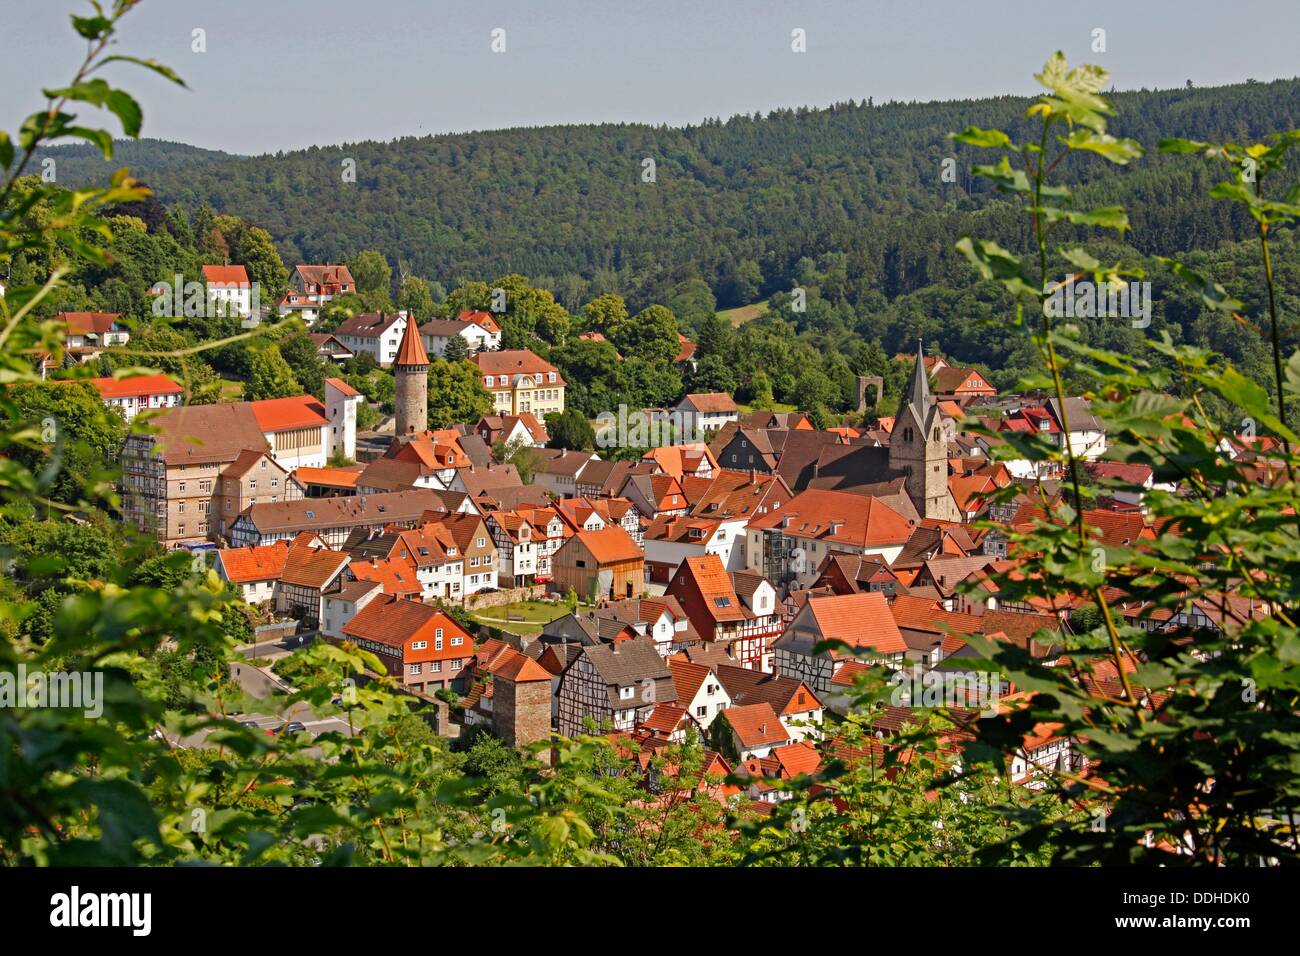 Spangenberg is a small town in northeastern Hesse in the Schwalm-Eder district. It has about 6200 inhabitants and a total area of ??97.7 square kilometers. The current size reached the city after the administrative and territorial reform in Hesse, as in th Stock Photo